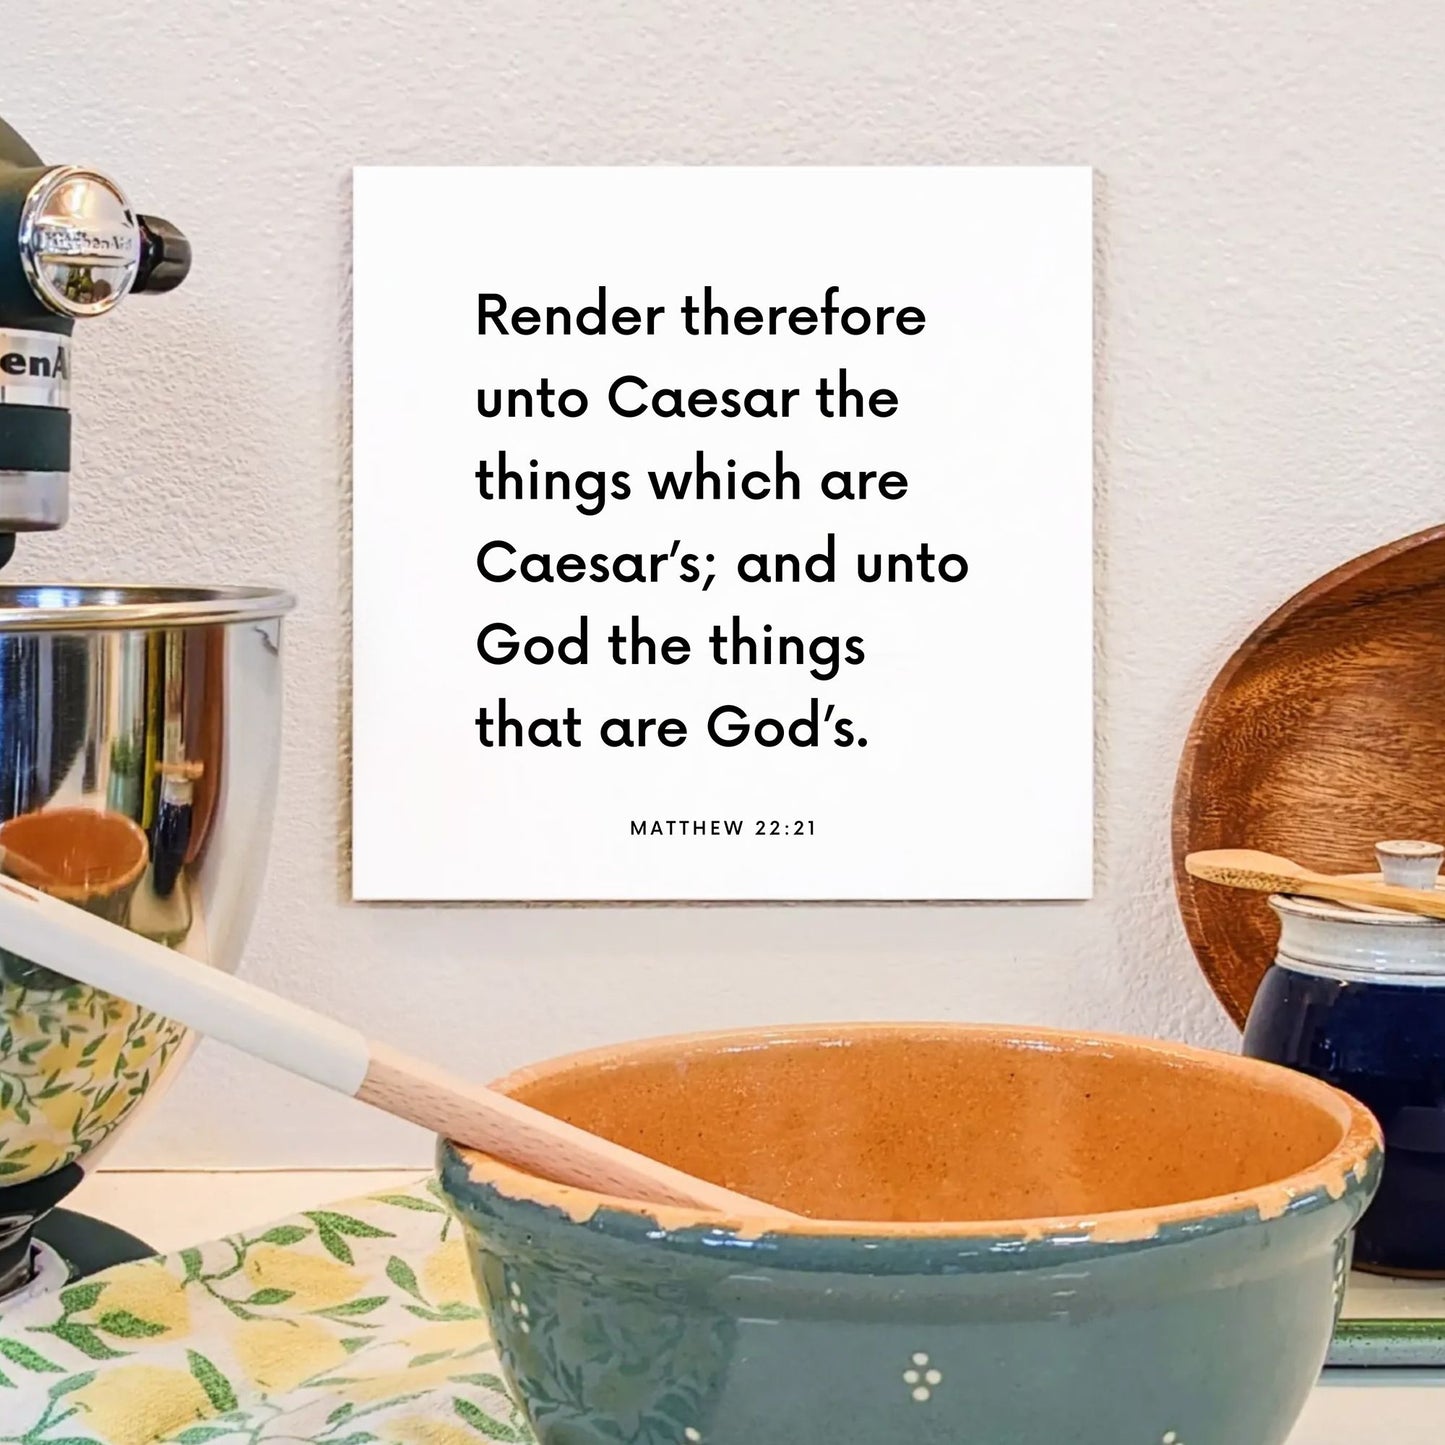 Kitchen mouting of the scripture tile for Matthew 22:21 - "Render therefore unto Caesar the things which are Caesar’s"